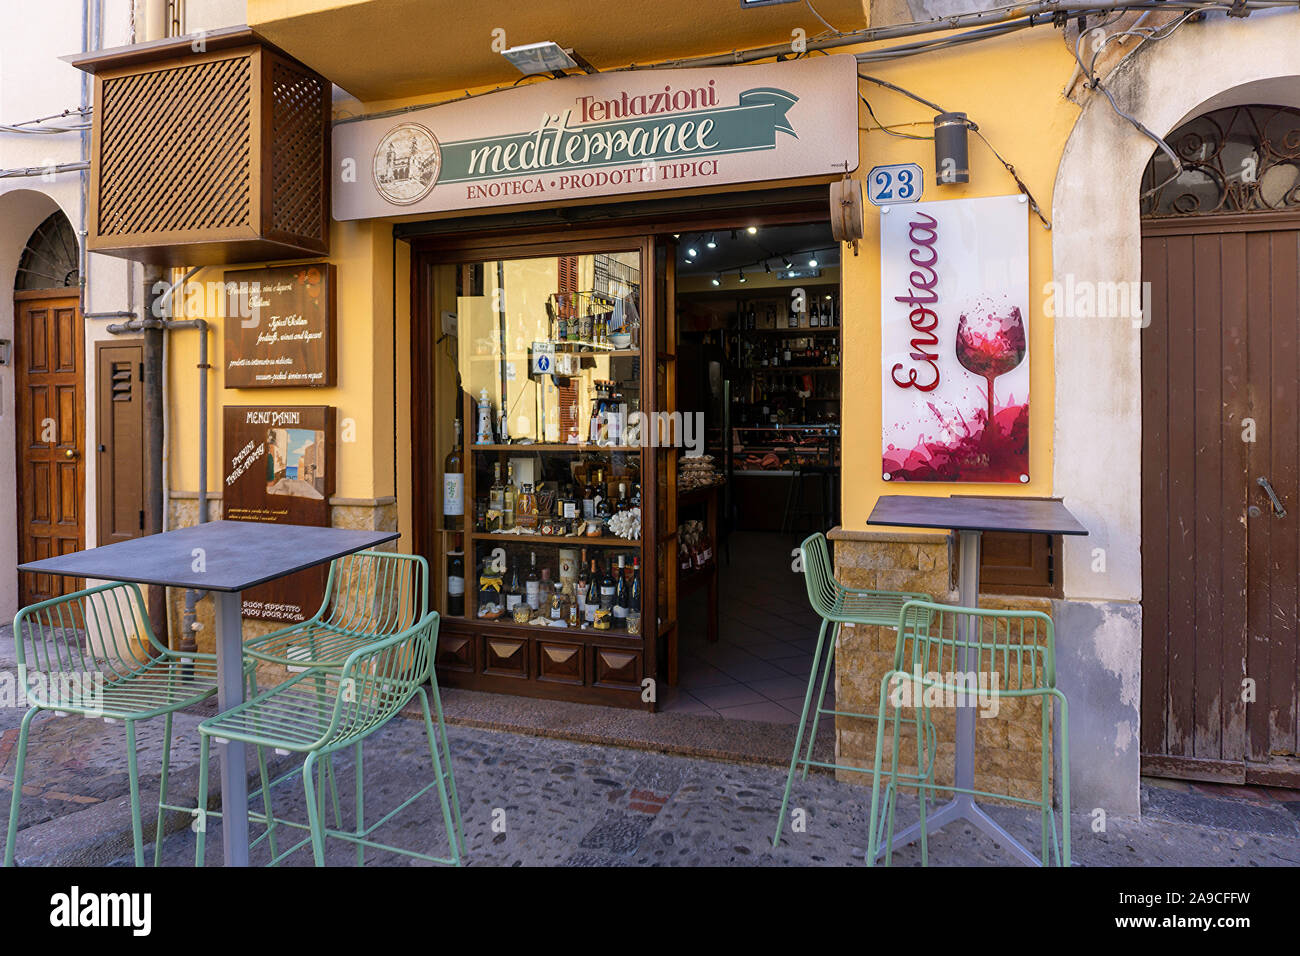 A small wine bar/delicatessen in Cefalú, Sicily. The town has many small bars and restaurants among its narrow streets Stock Photo